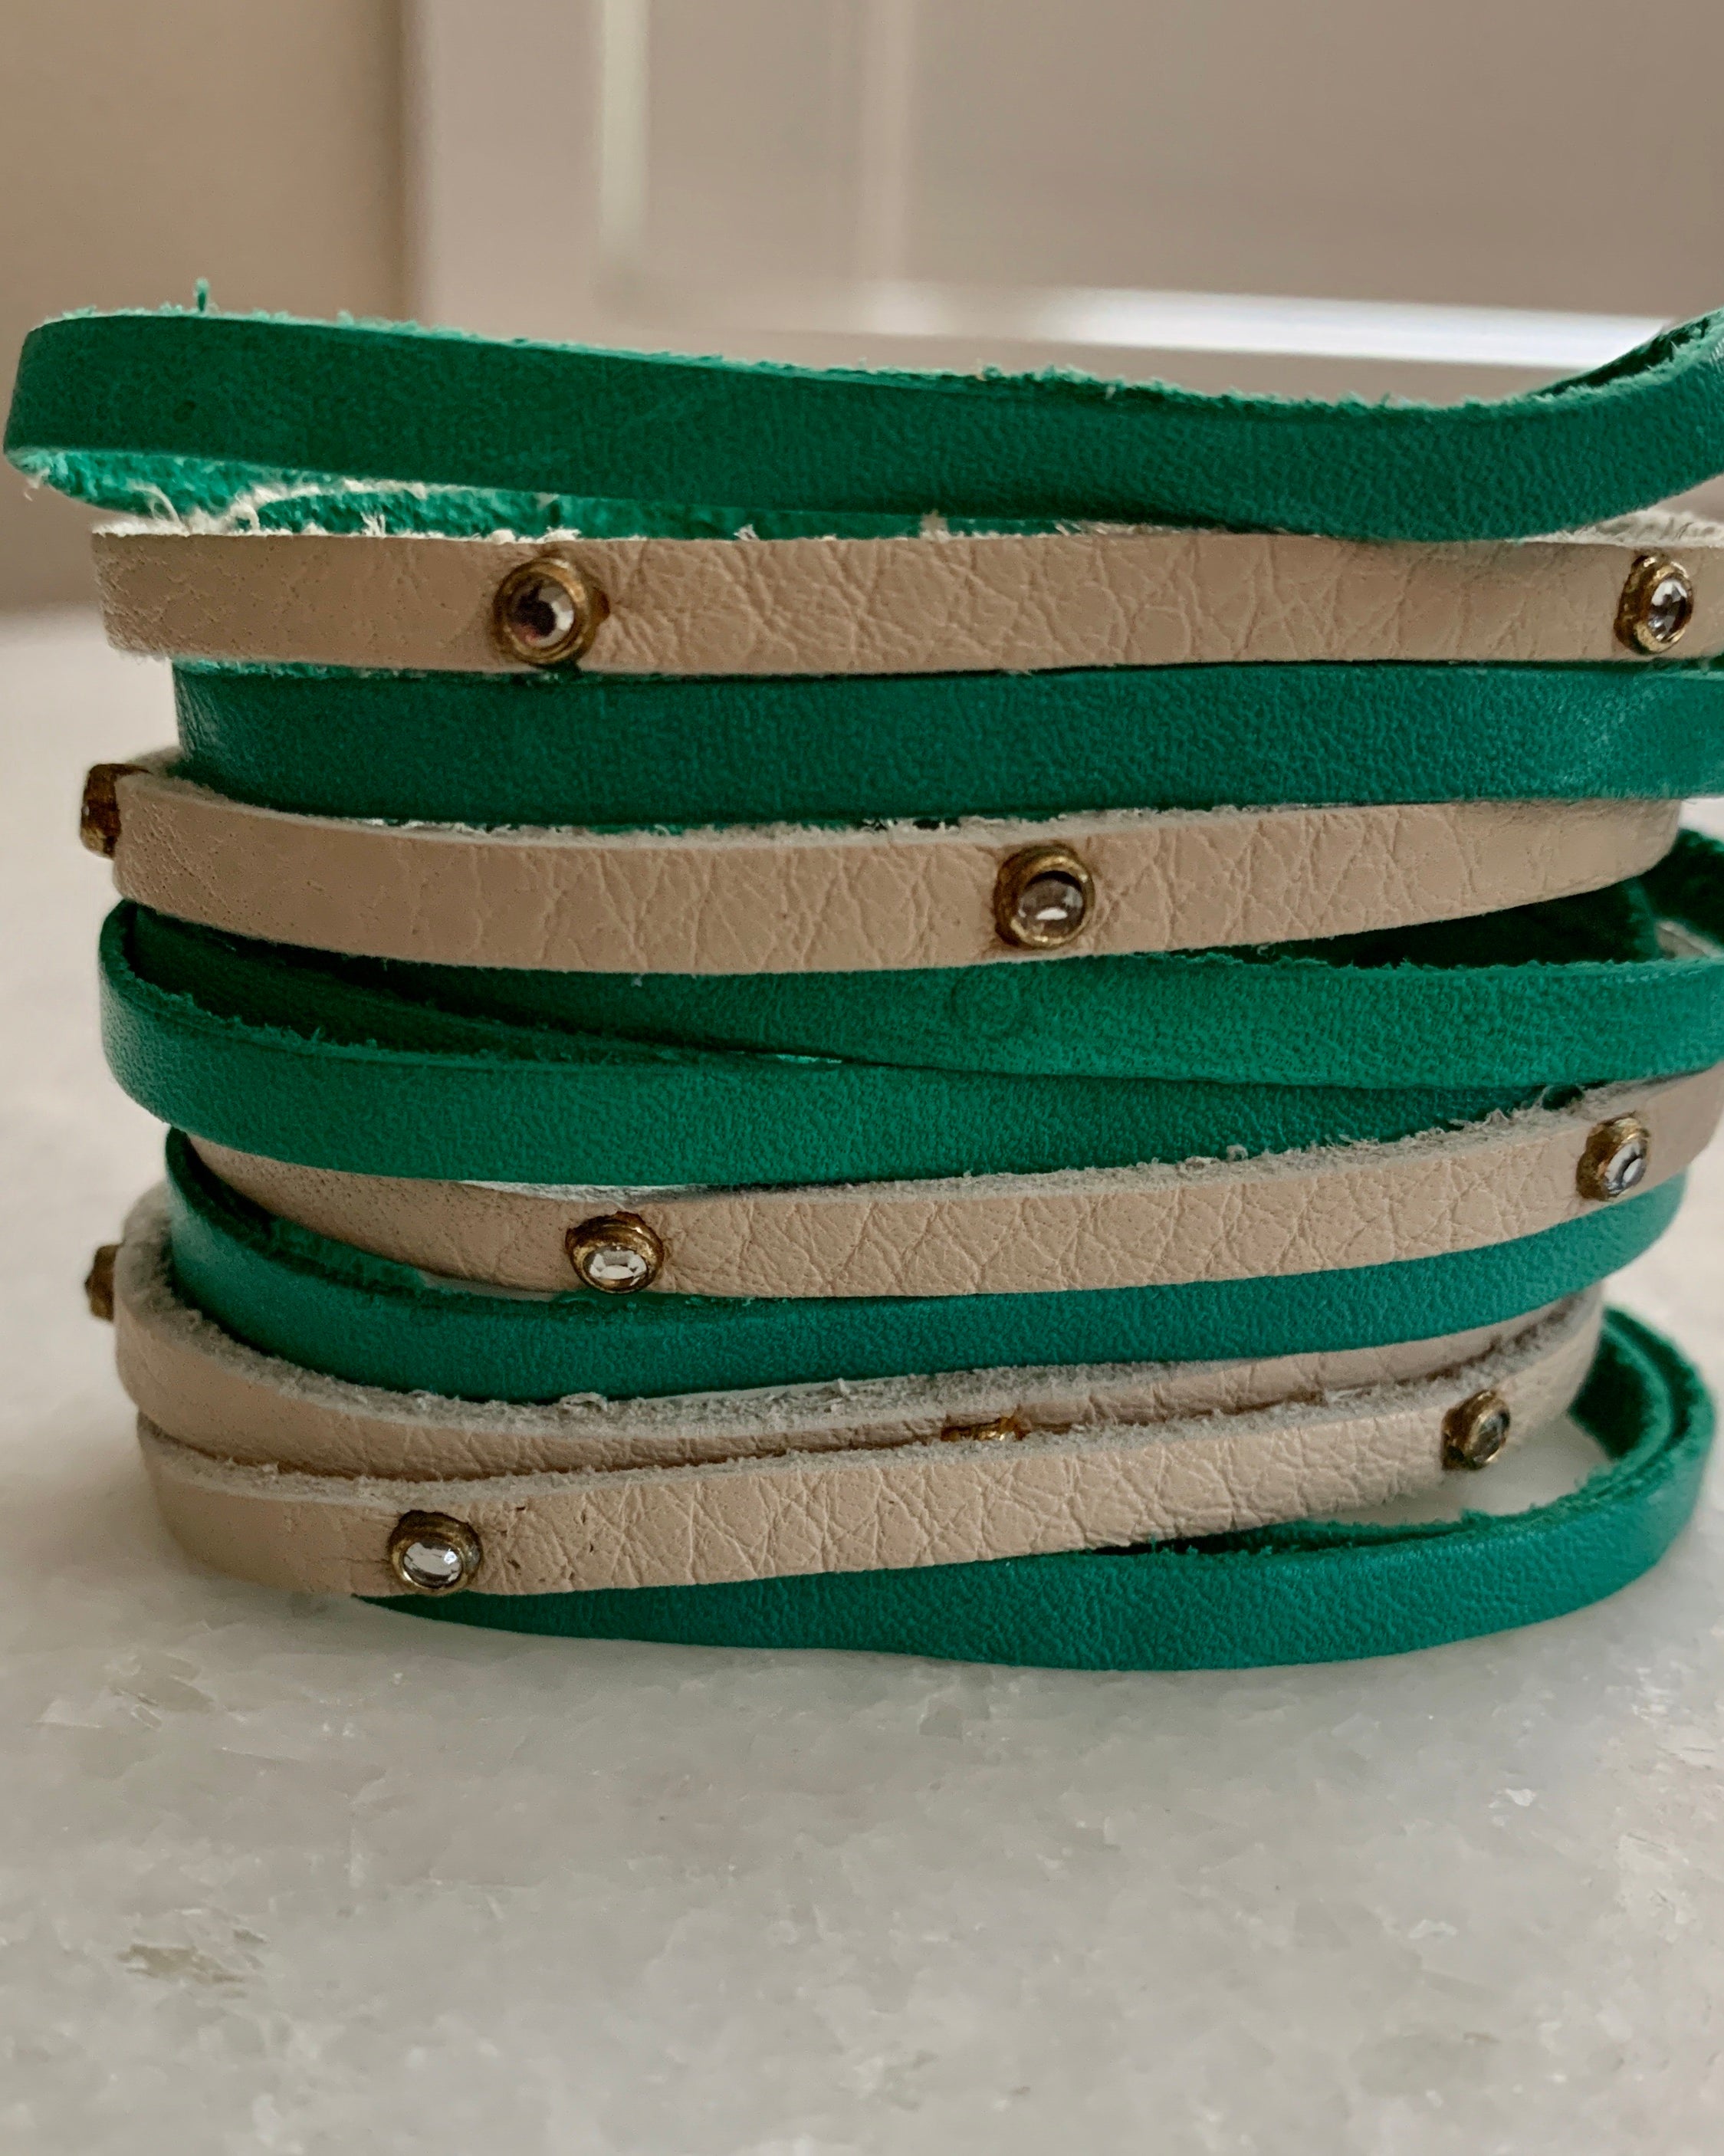 Off White & Persian Green Leather Bracelet.